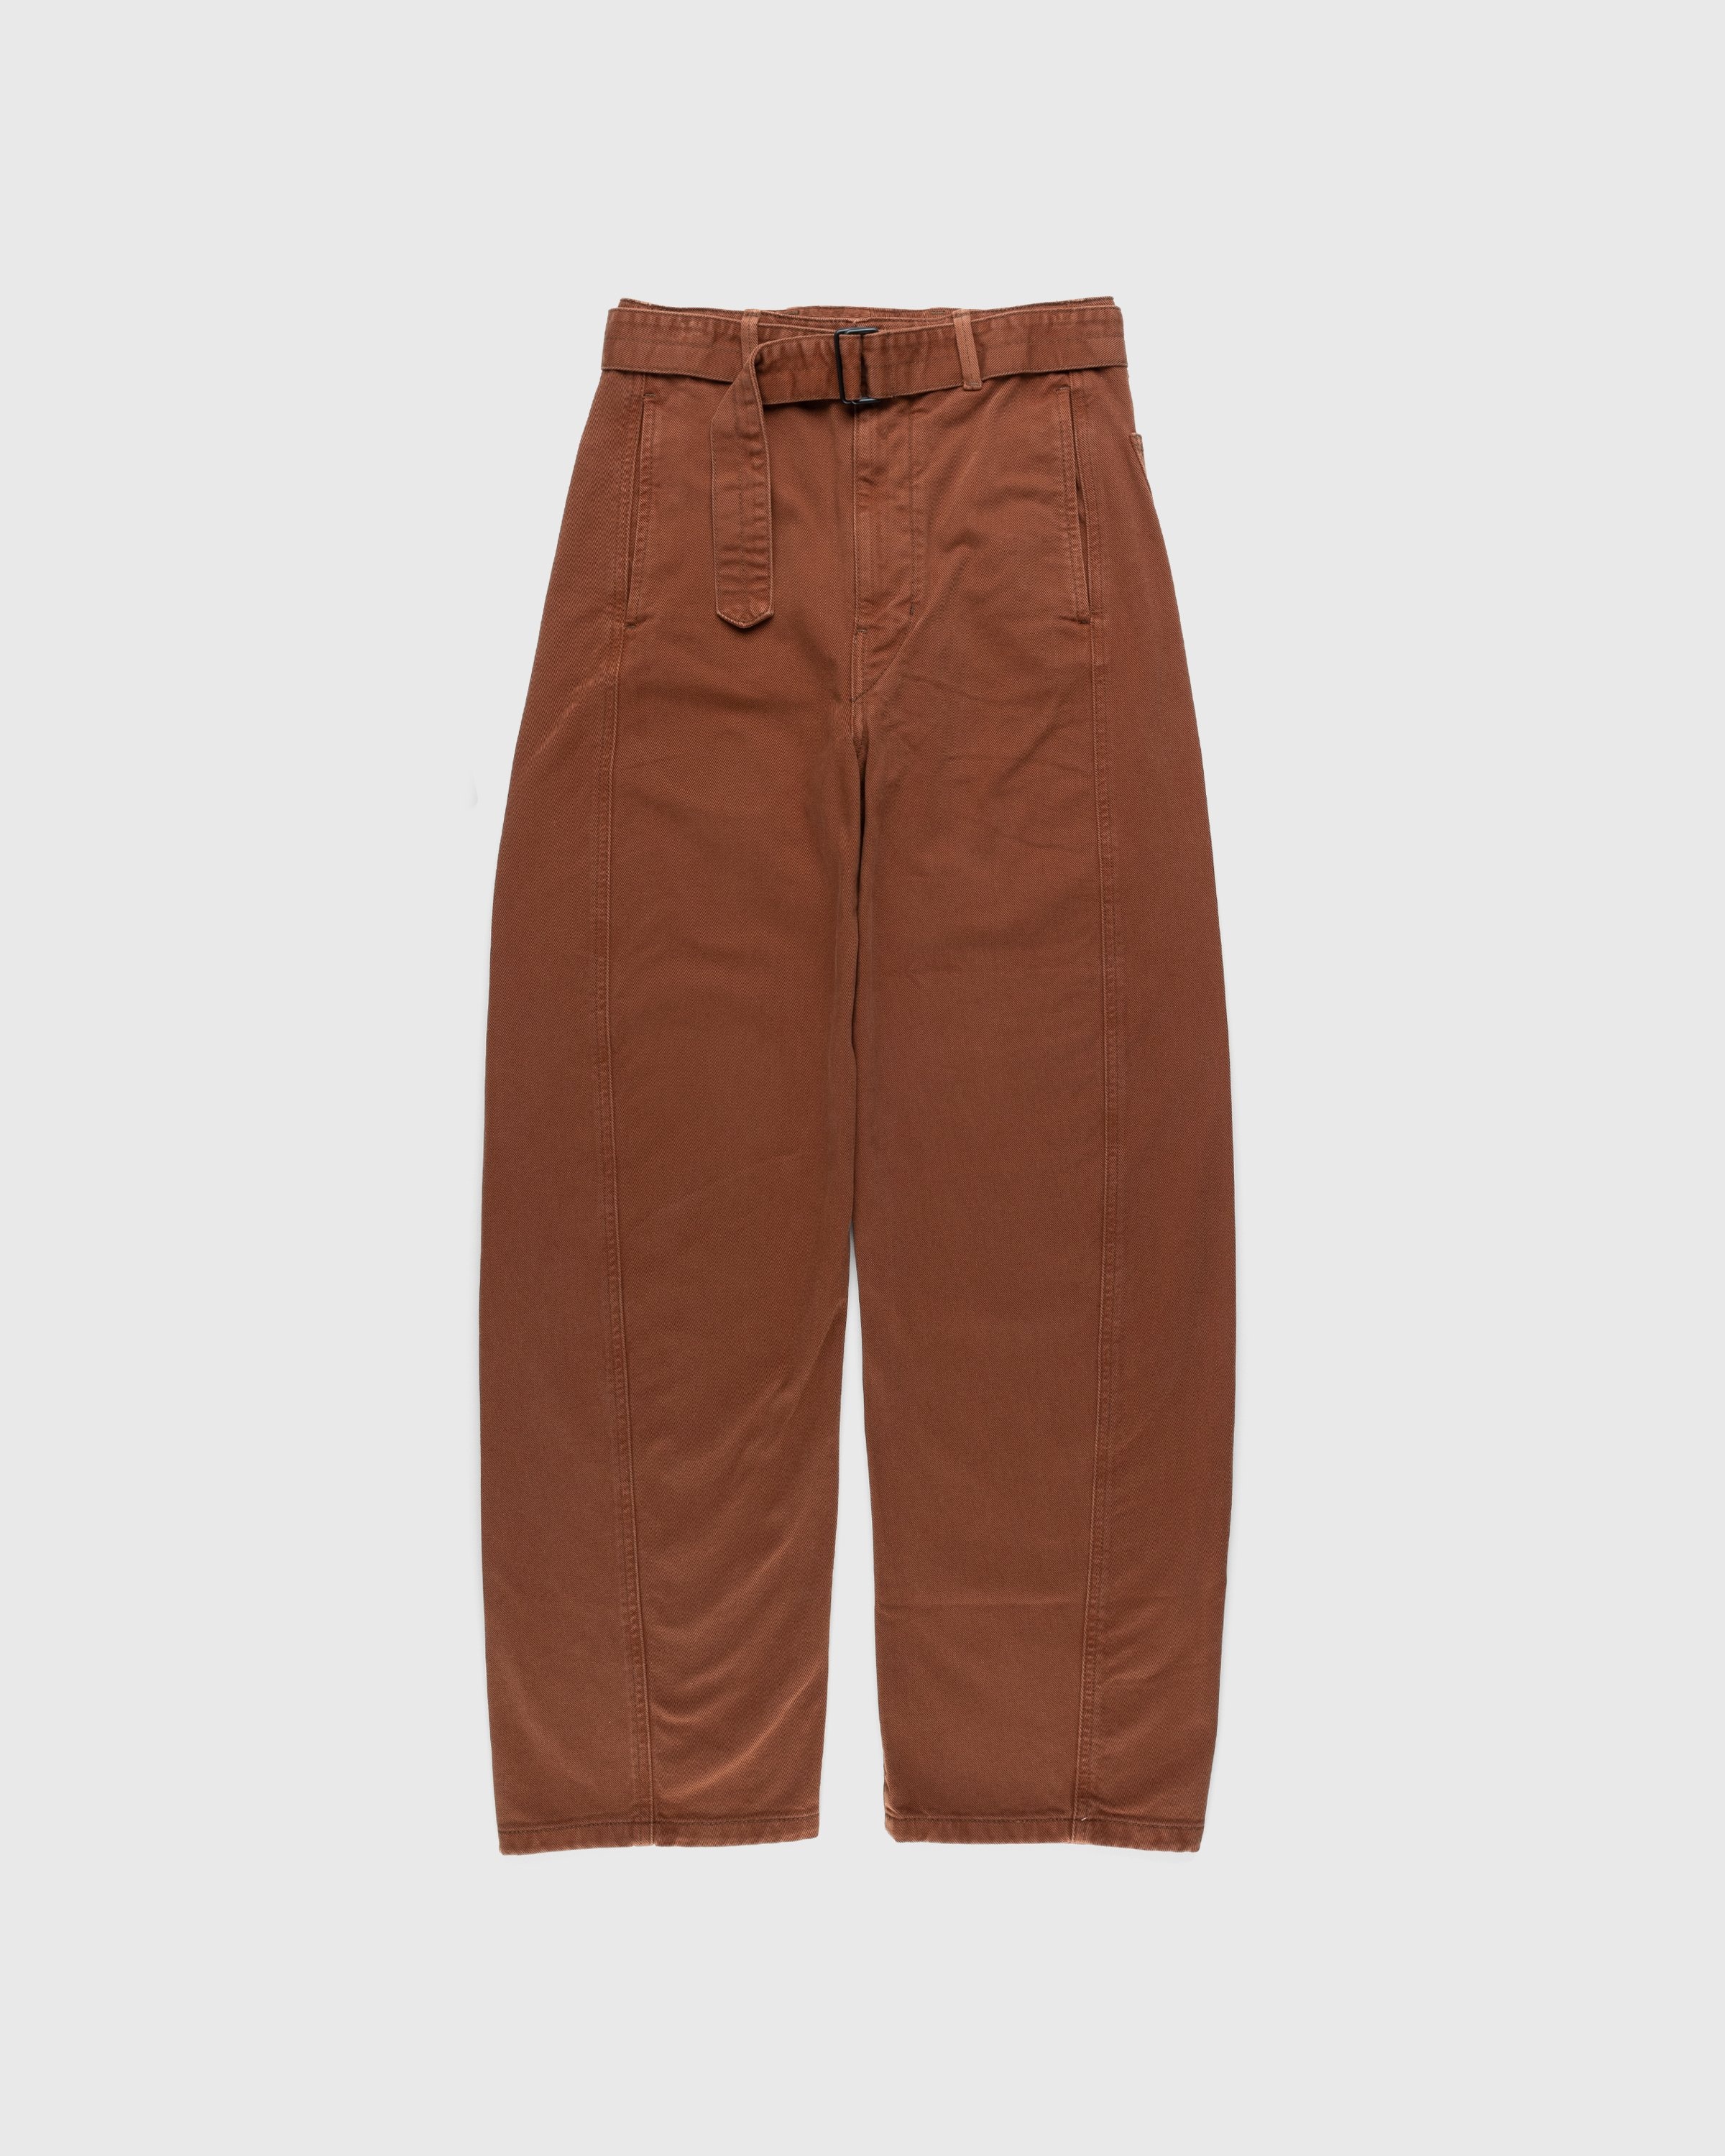 Om Lounge Shorts in Brown – The High Thai